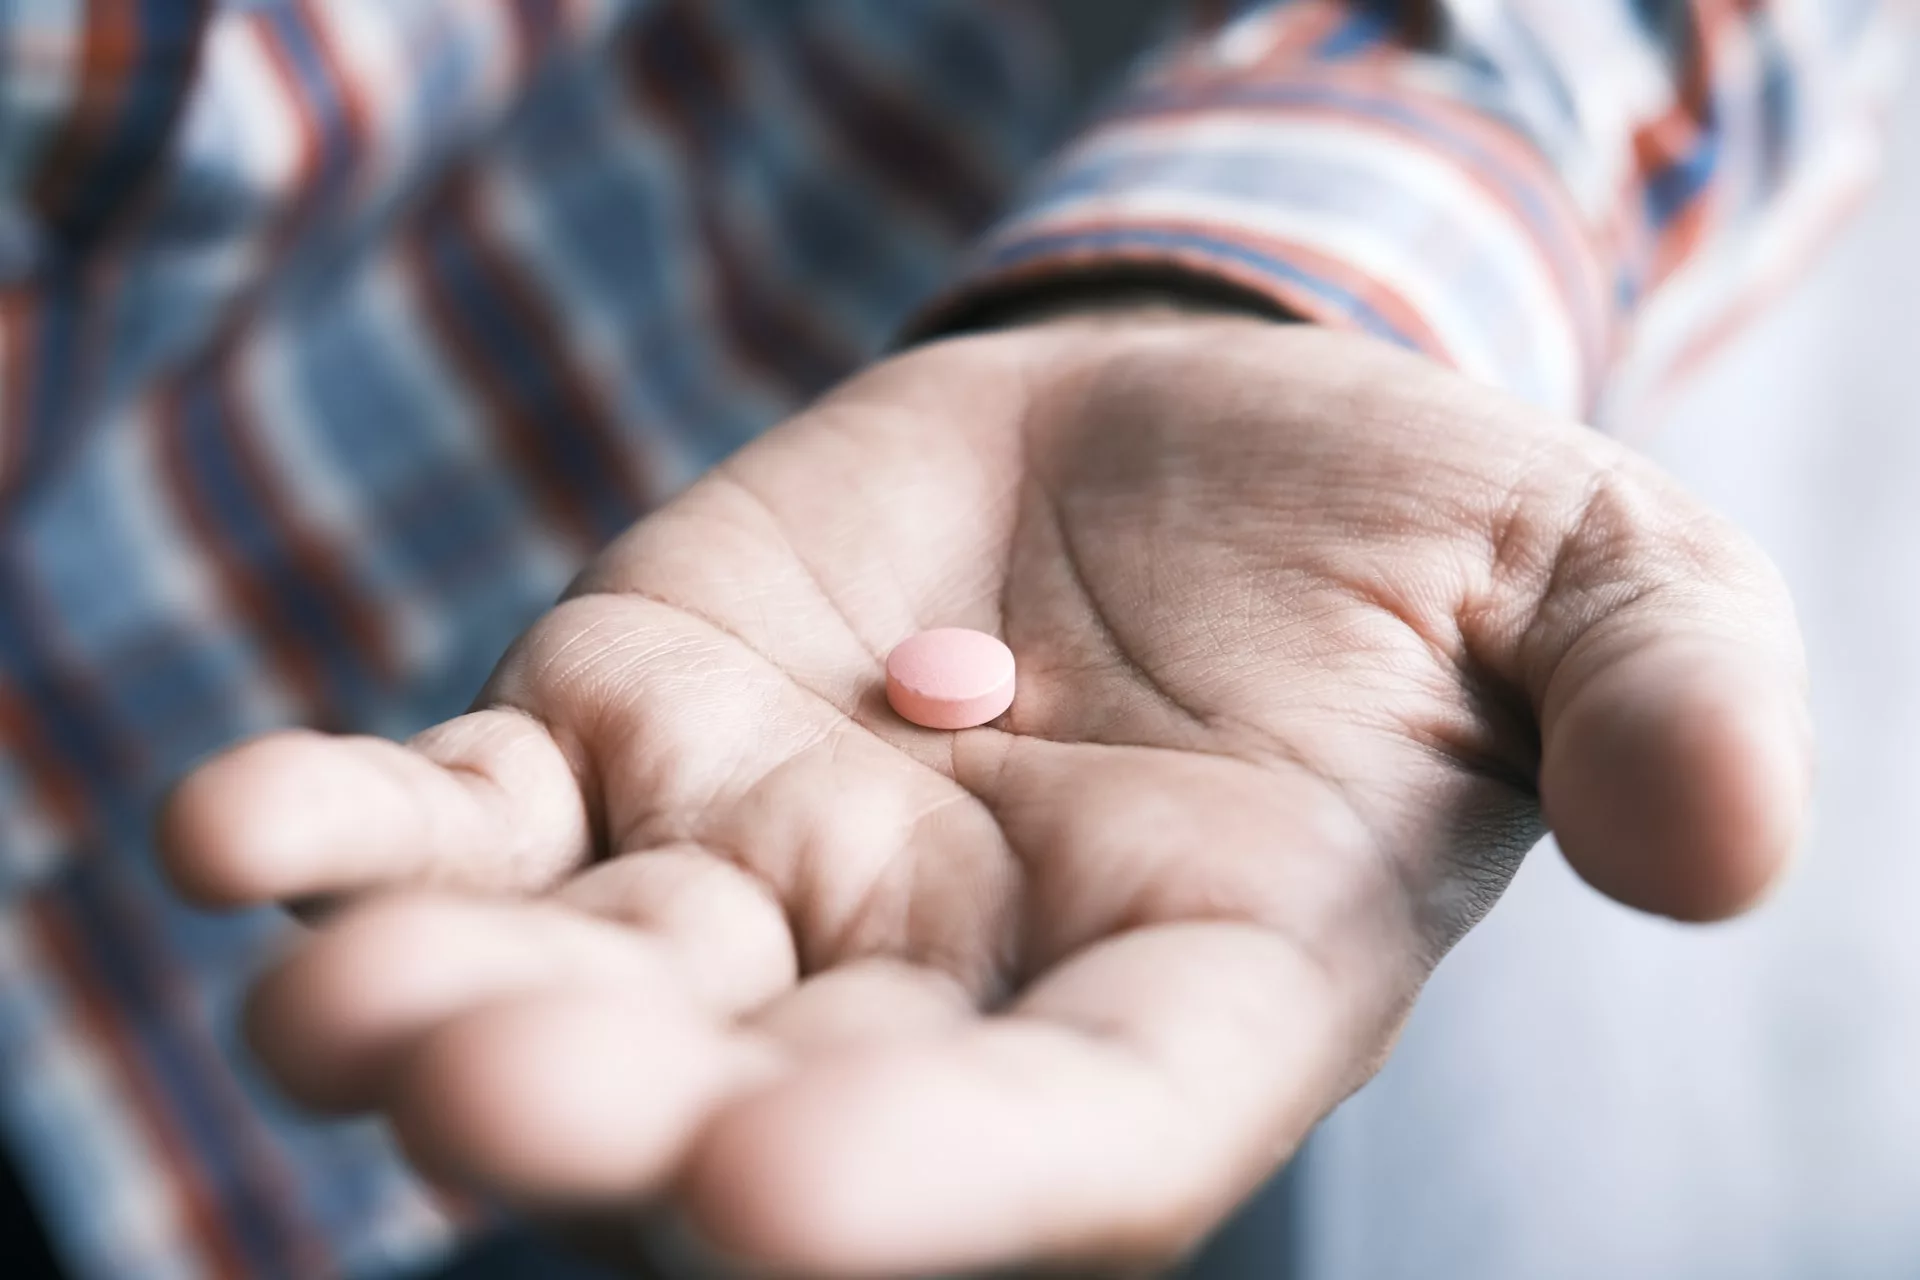 pill in someones hand